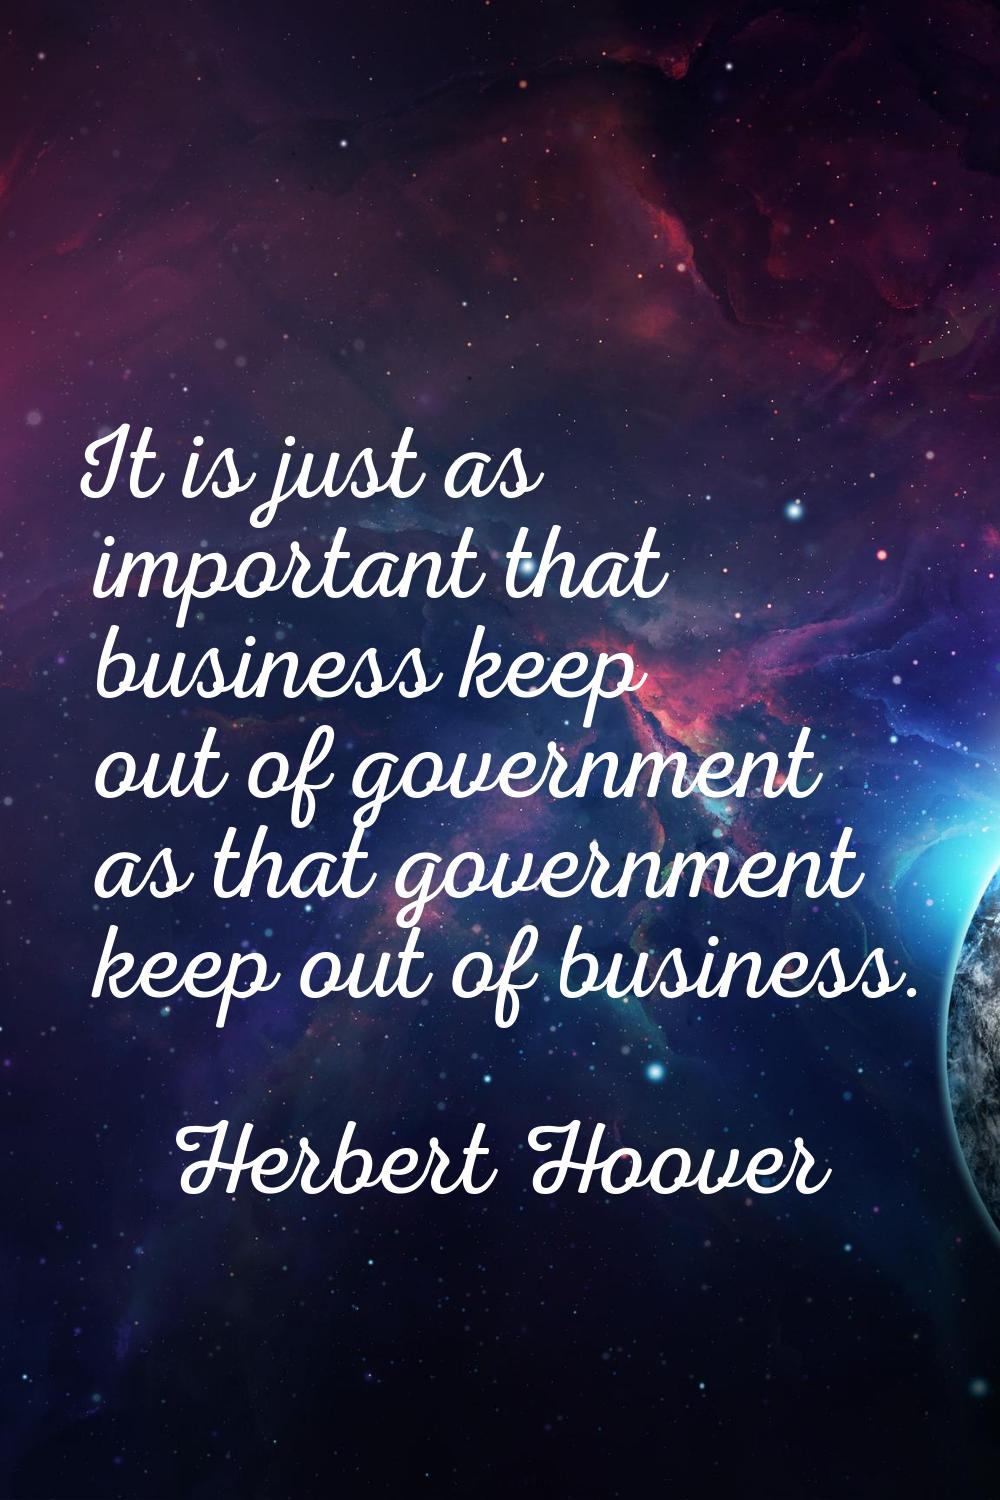 It is just as important that business keep out of government as that government keep out of busines